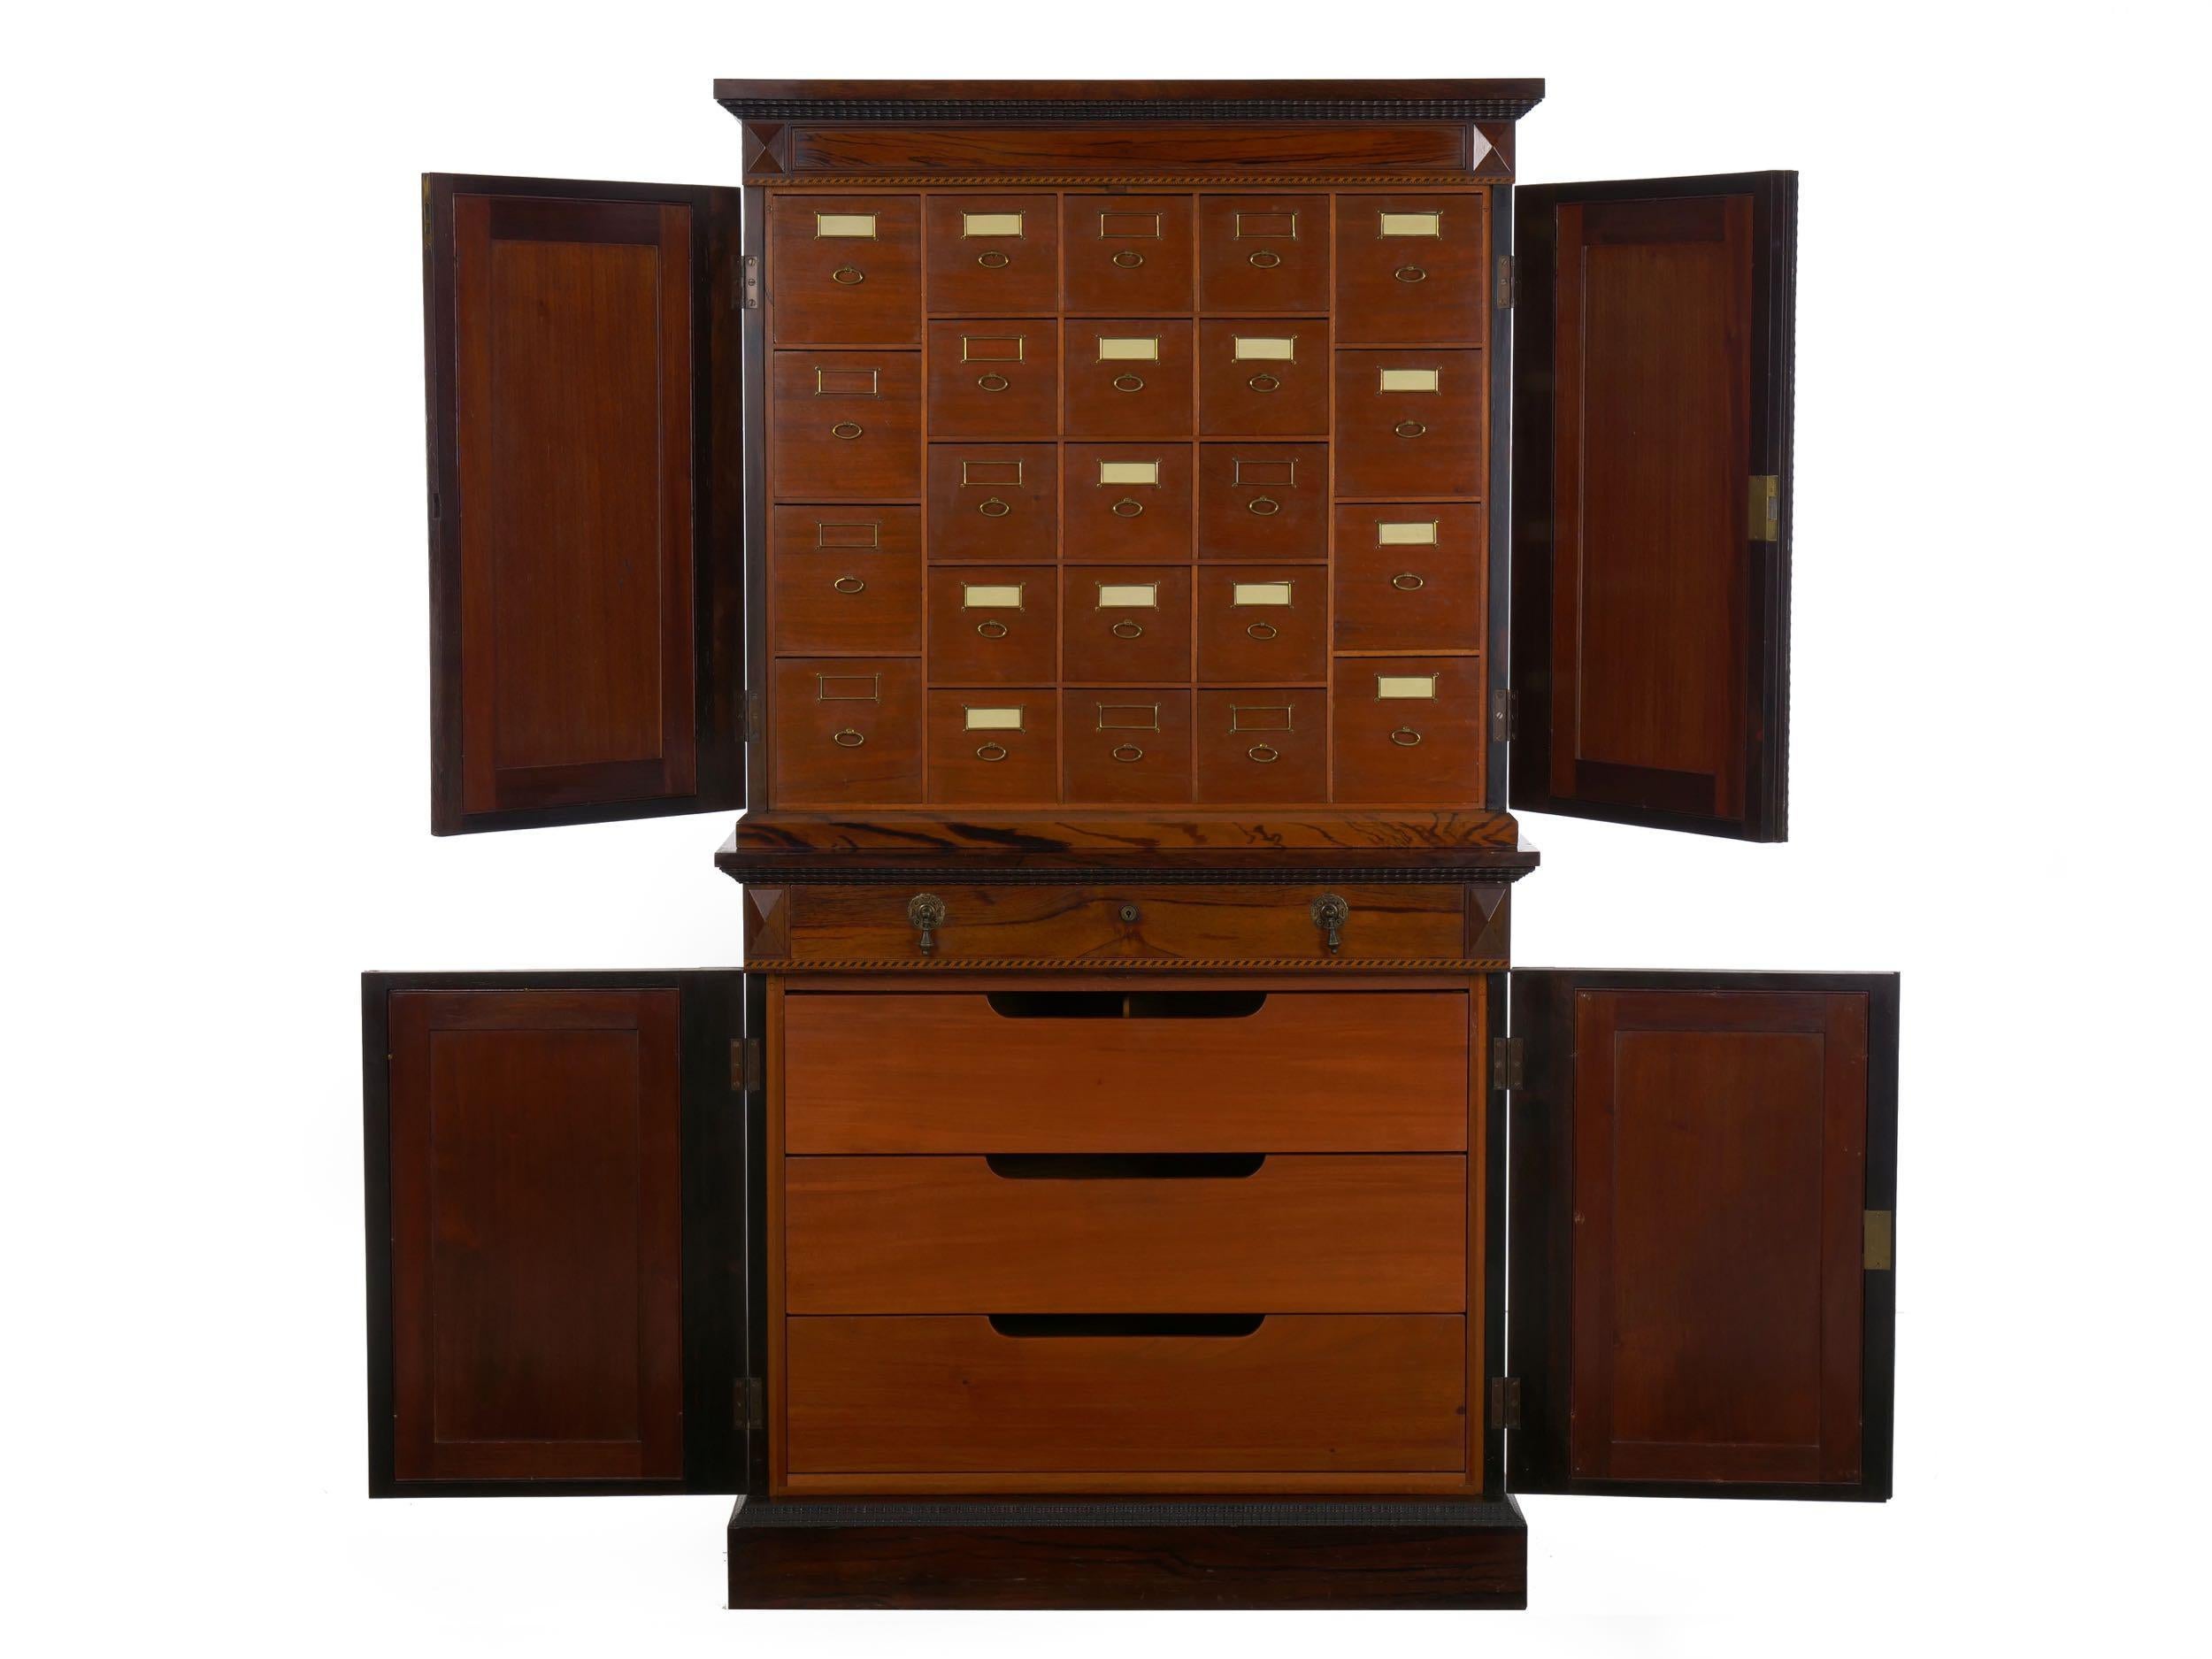 English Rosewood Antique Humidor Cabinet by Mellier & Co, London, circa 1880 In Good Condition For Sale In Shippensburg, PA